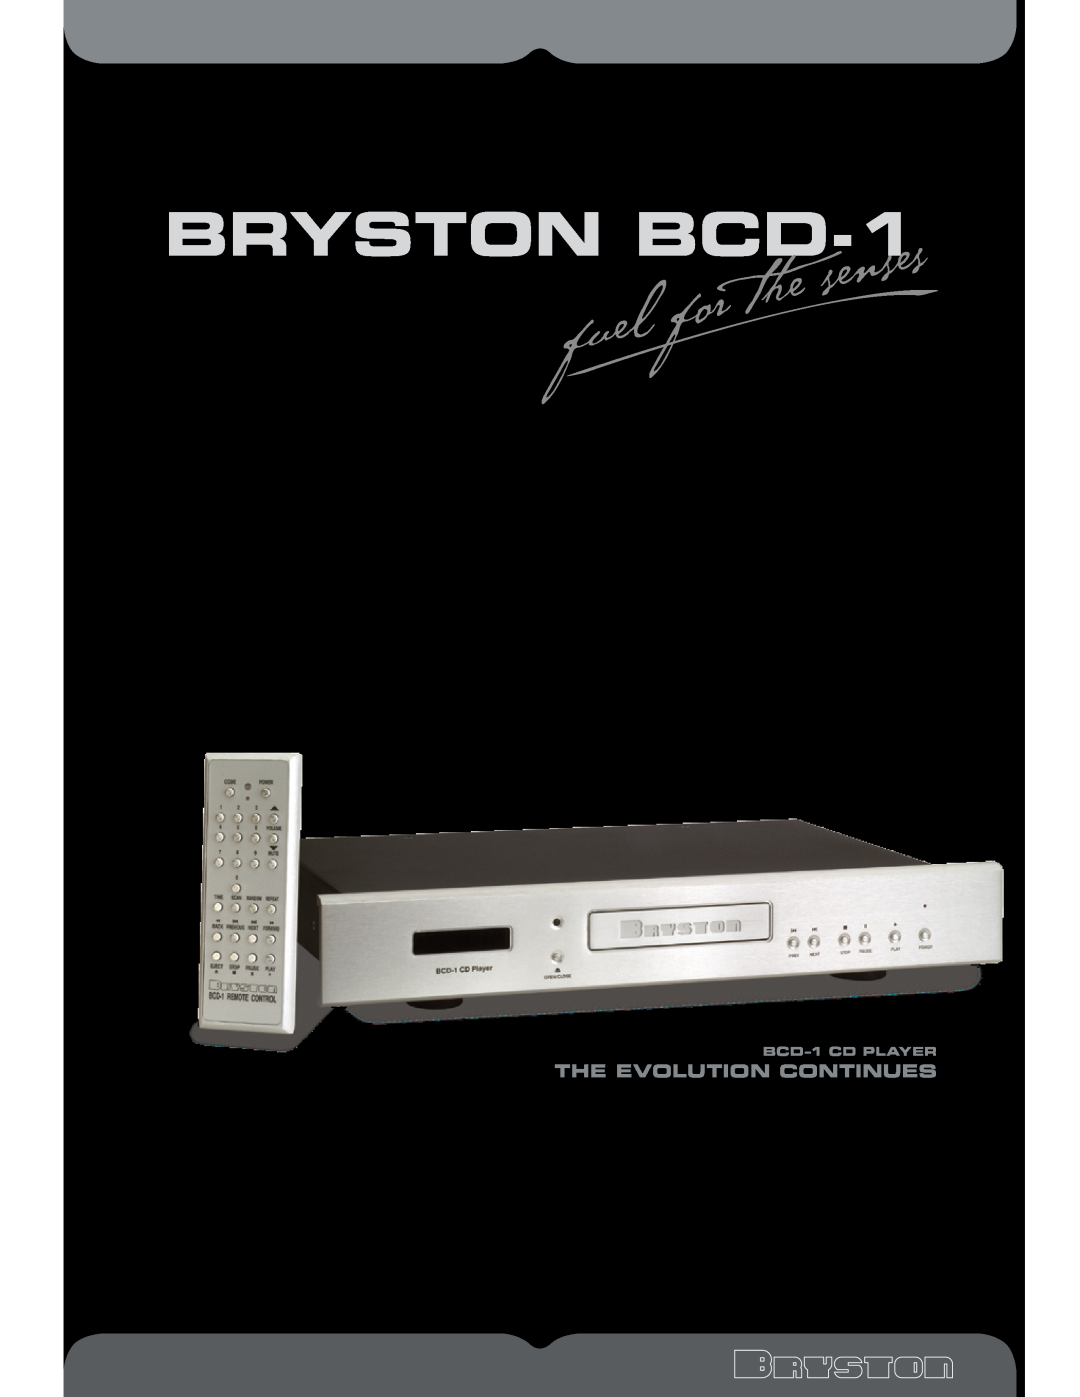 Bryston manual BRYSTON BCD-1, The Evolution Continues, BCD-1CD PLAYER 